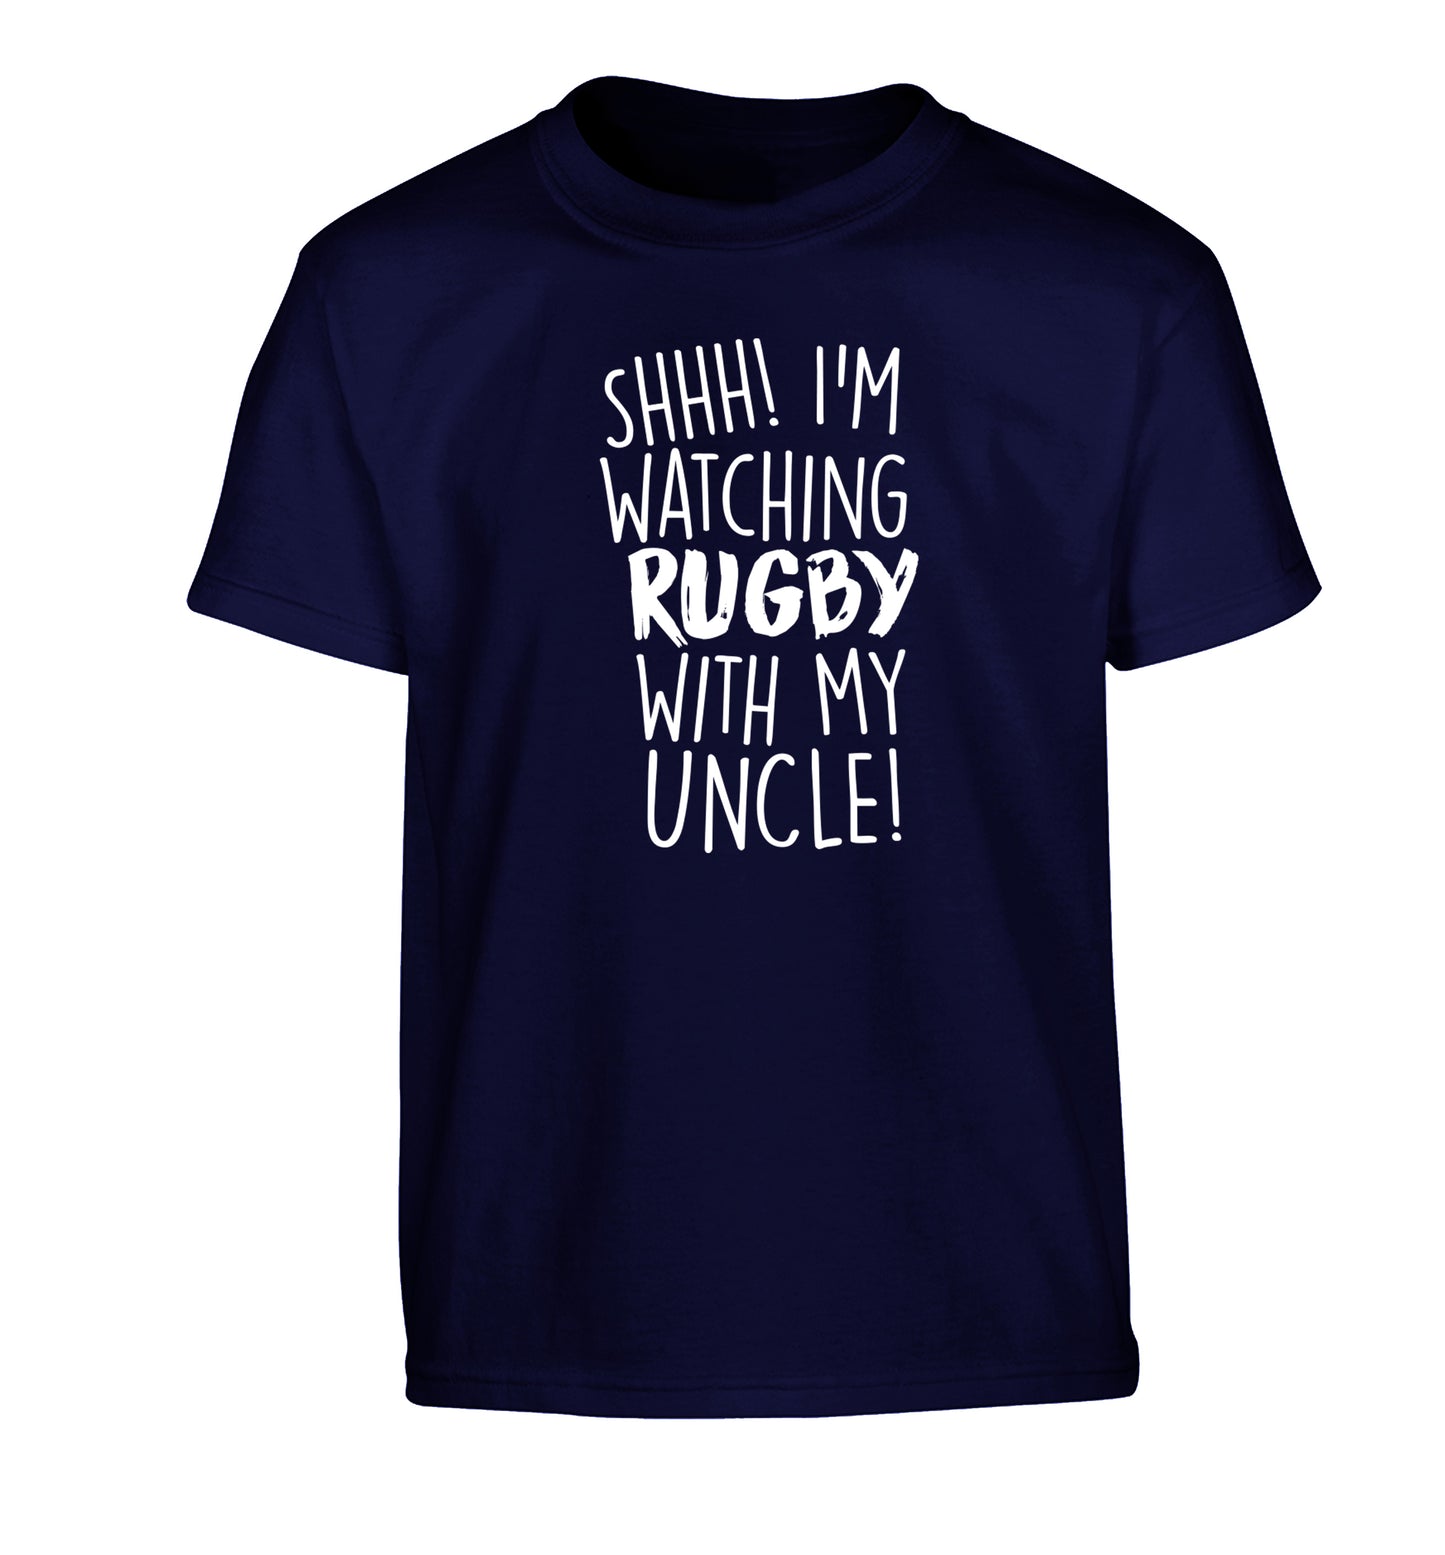 Shh.. I'm watching rugby with my uncle Children's navy Tshirt 12-13 Years